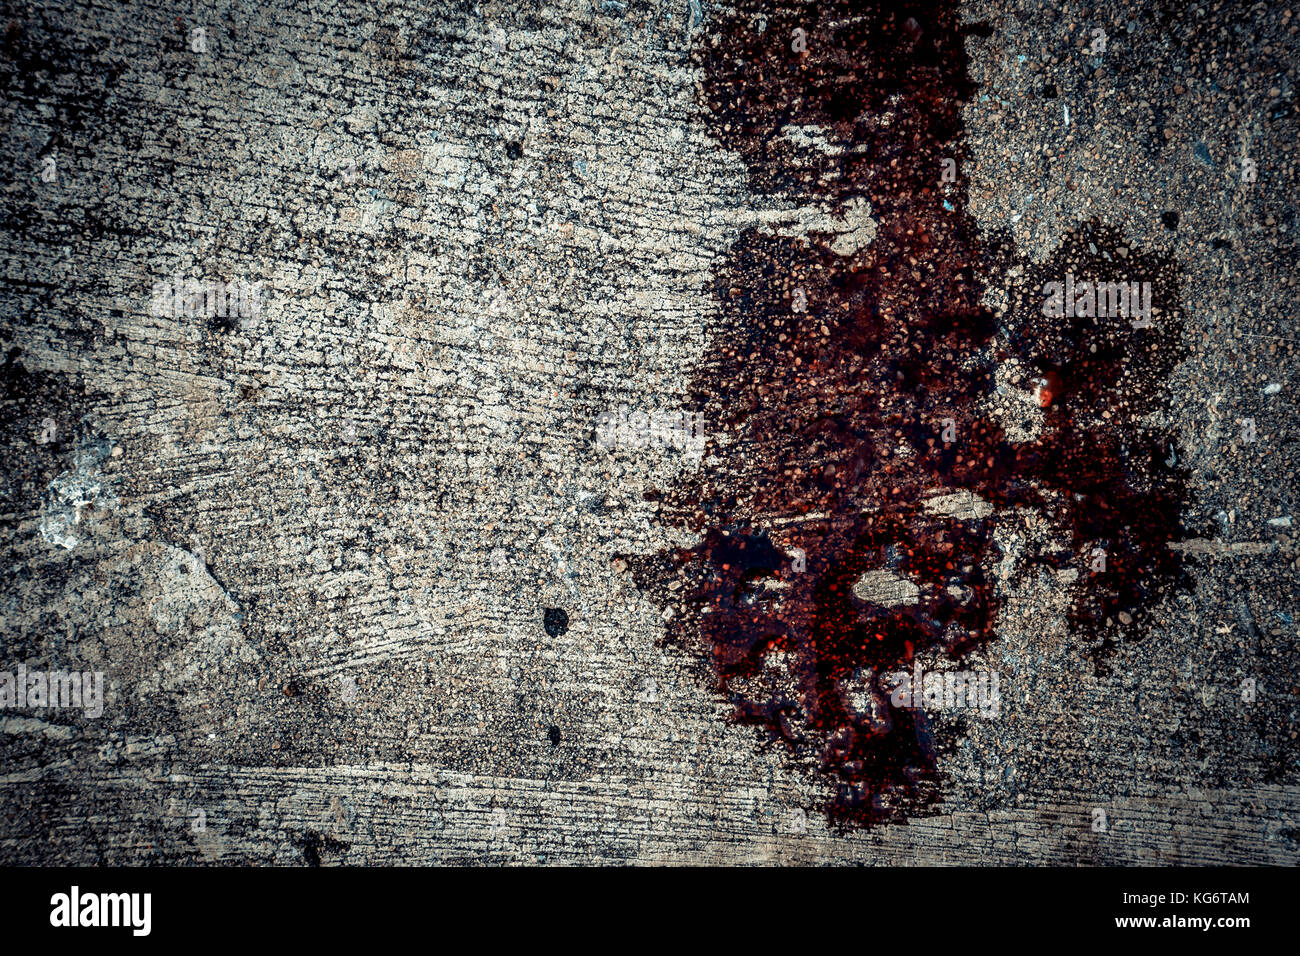 blood on the floor, abstract background Stock Photo